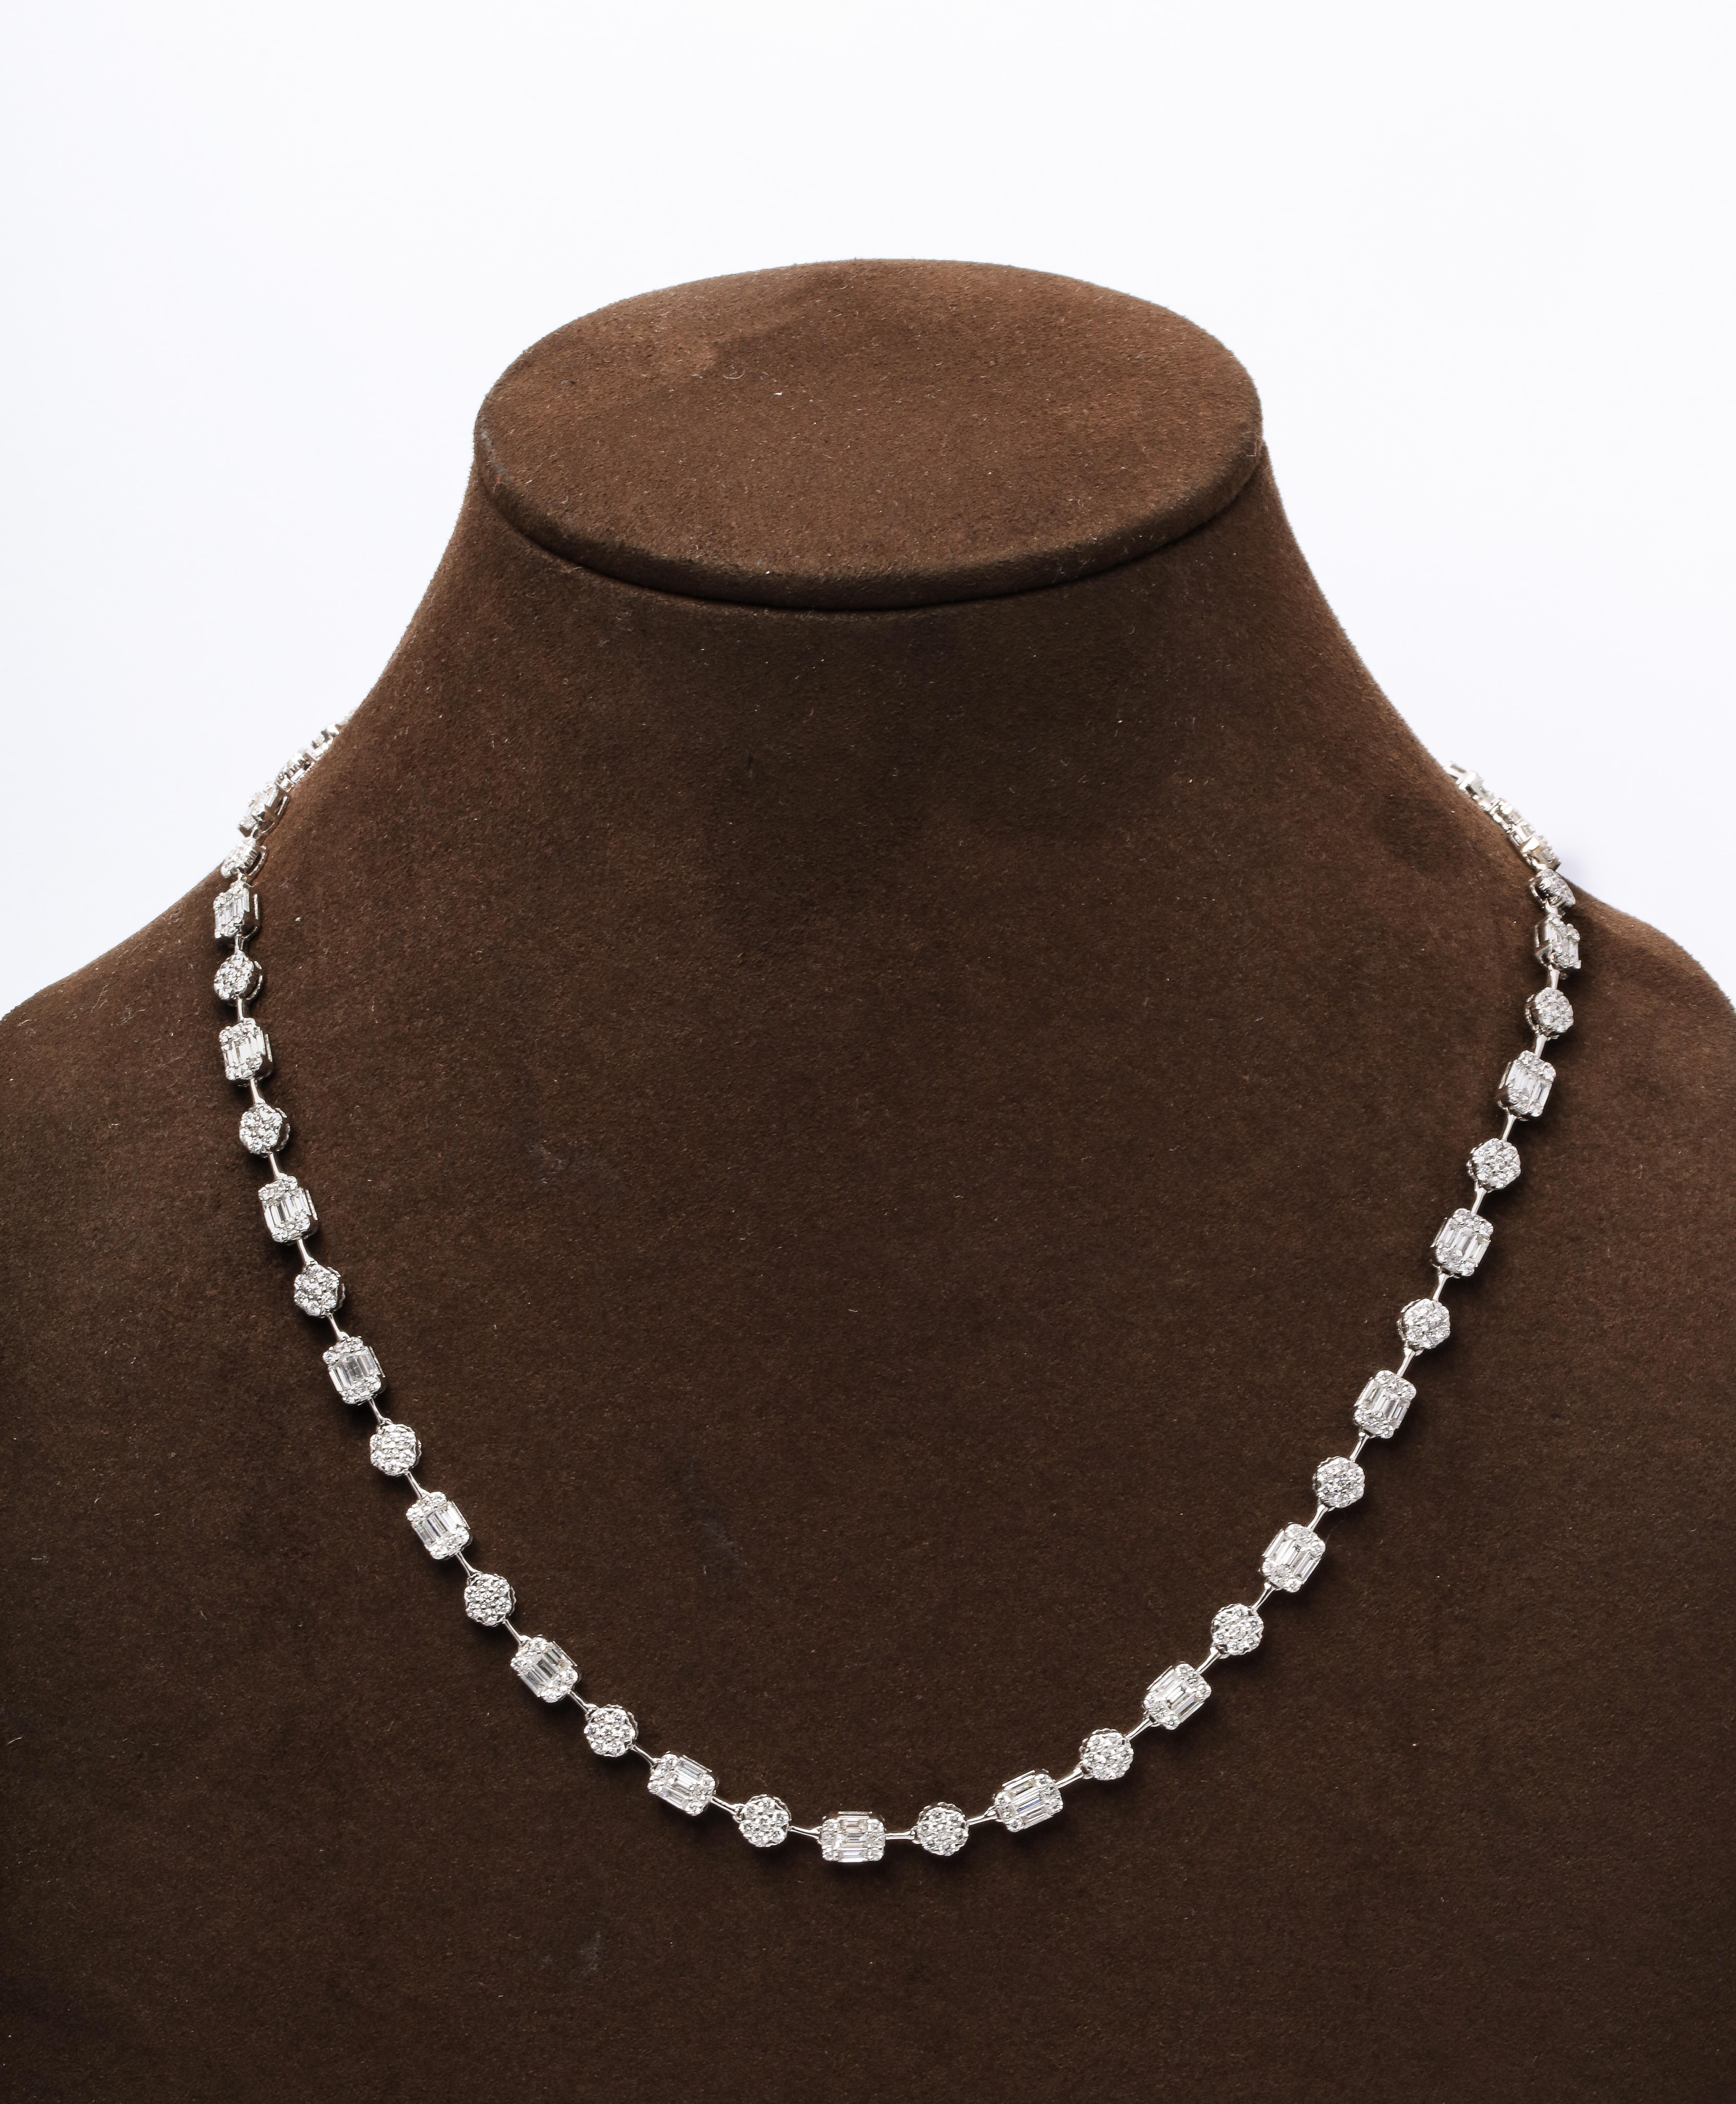 
An stunning multi shape diamond illusion set necklace.

7.74 carats of white round and baguette diamonds set in 18k white gold 

17.25 inch length that can be adjusted